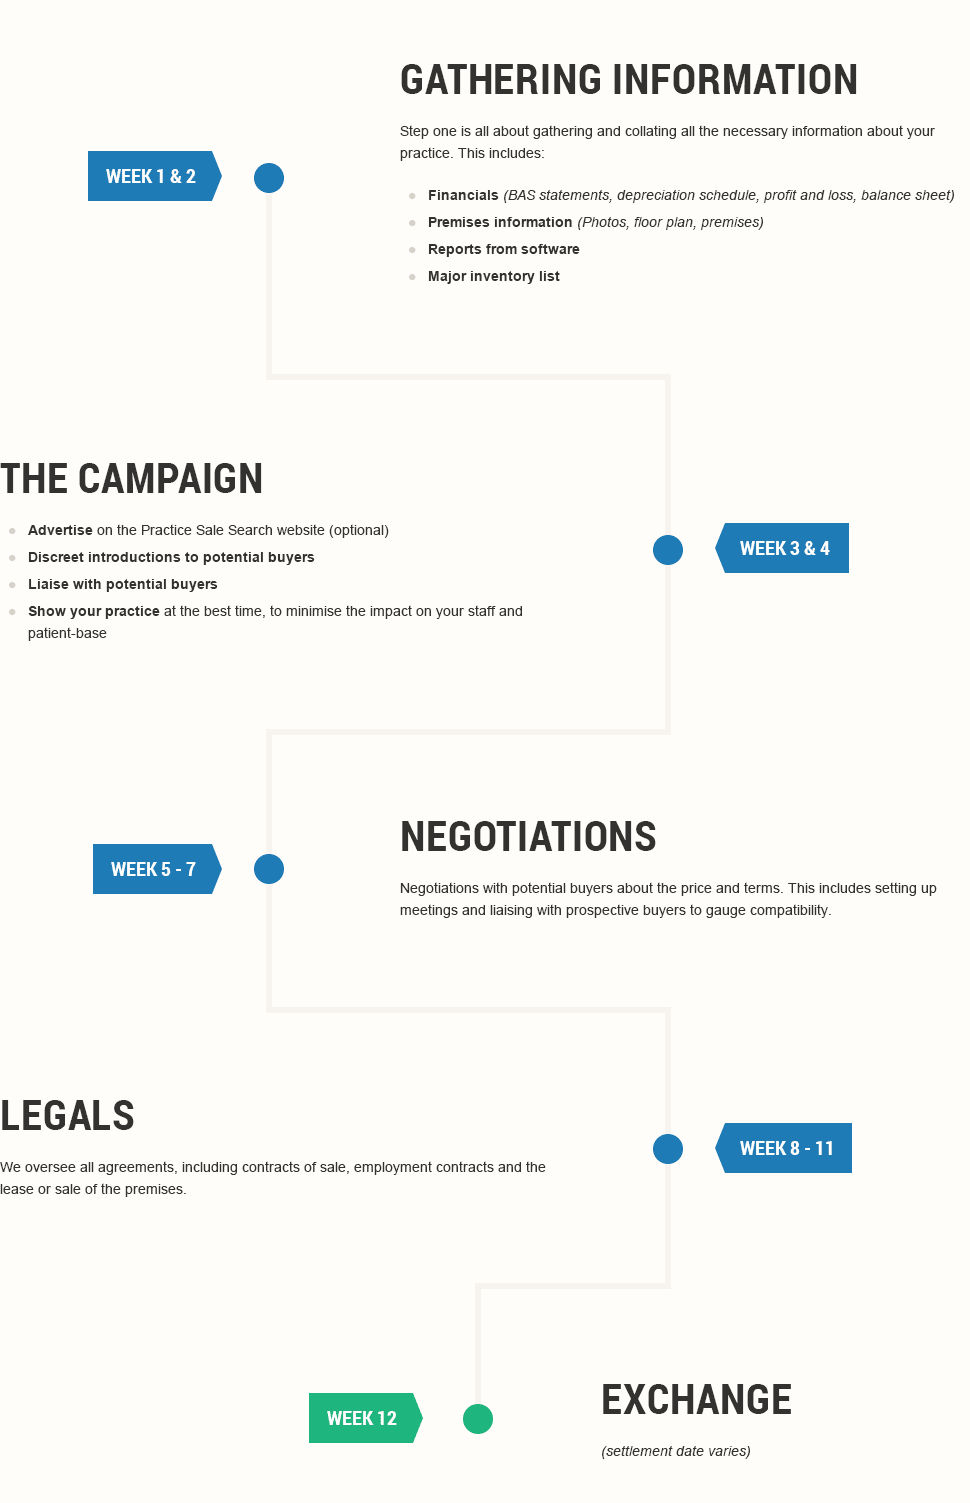 Process infographic